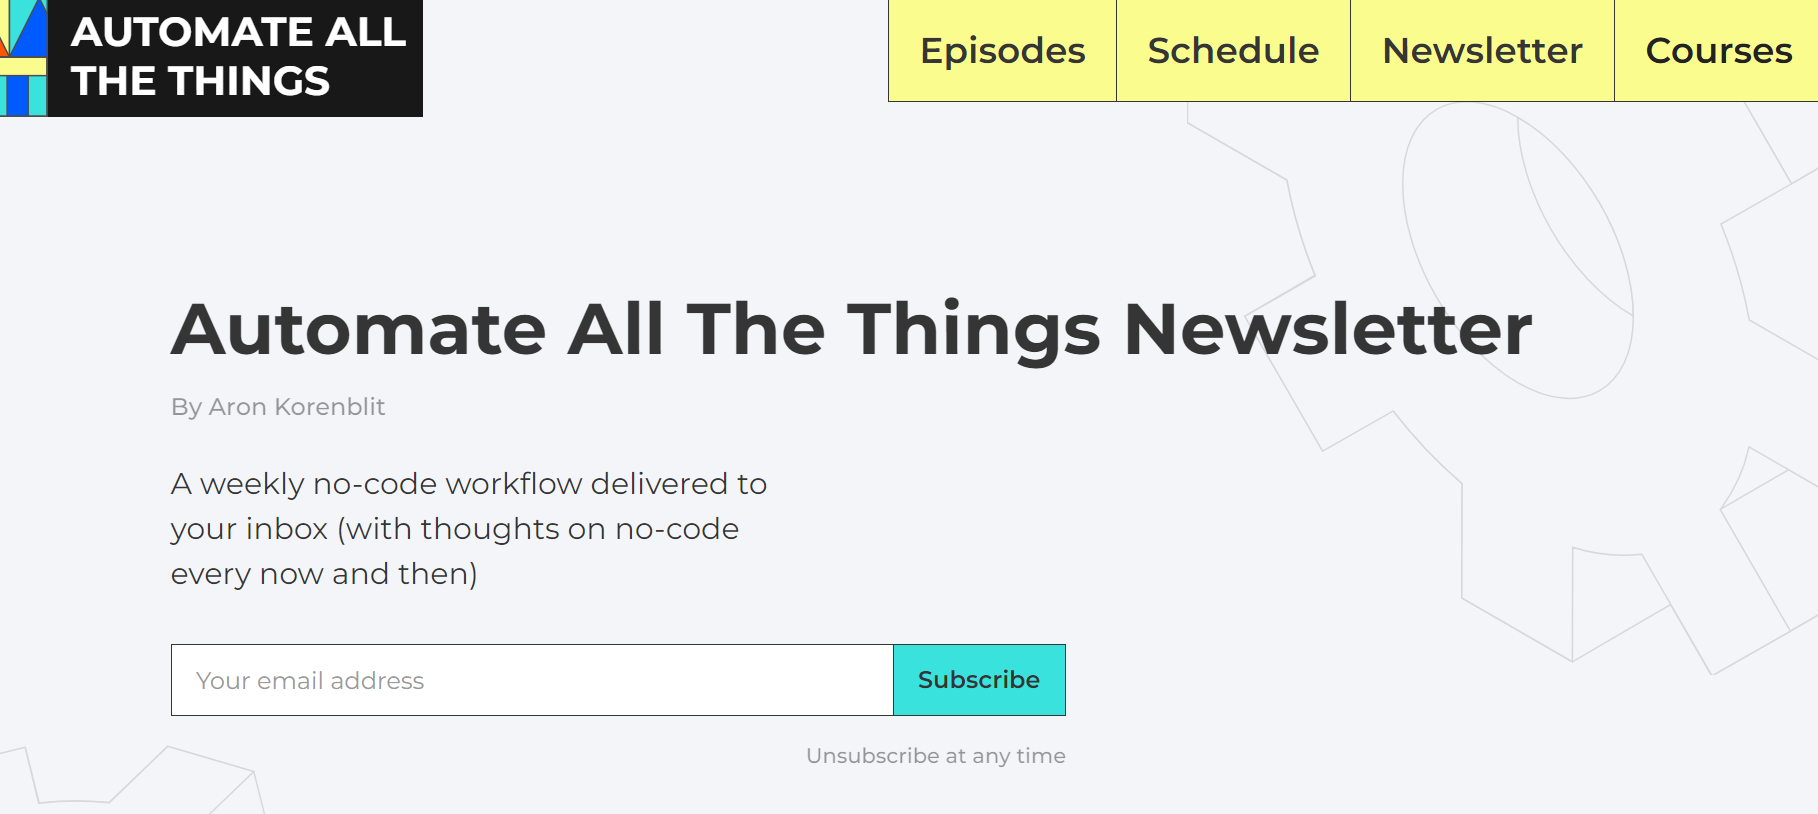 Automate All The Things Newsletter